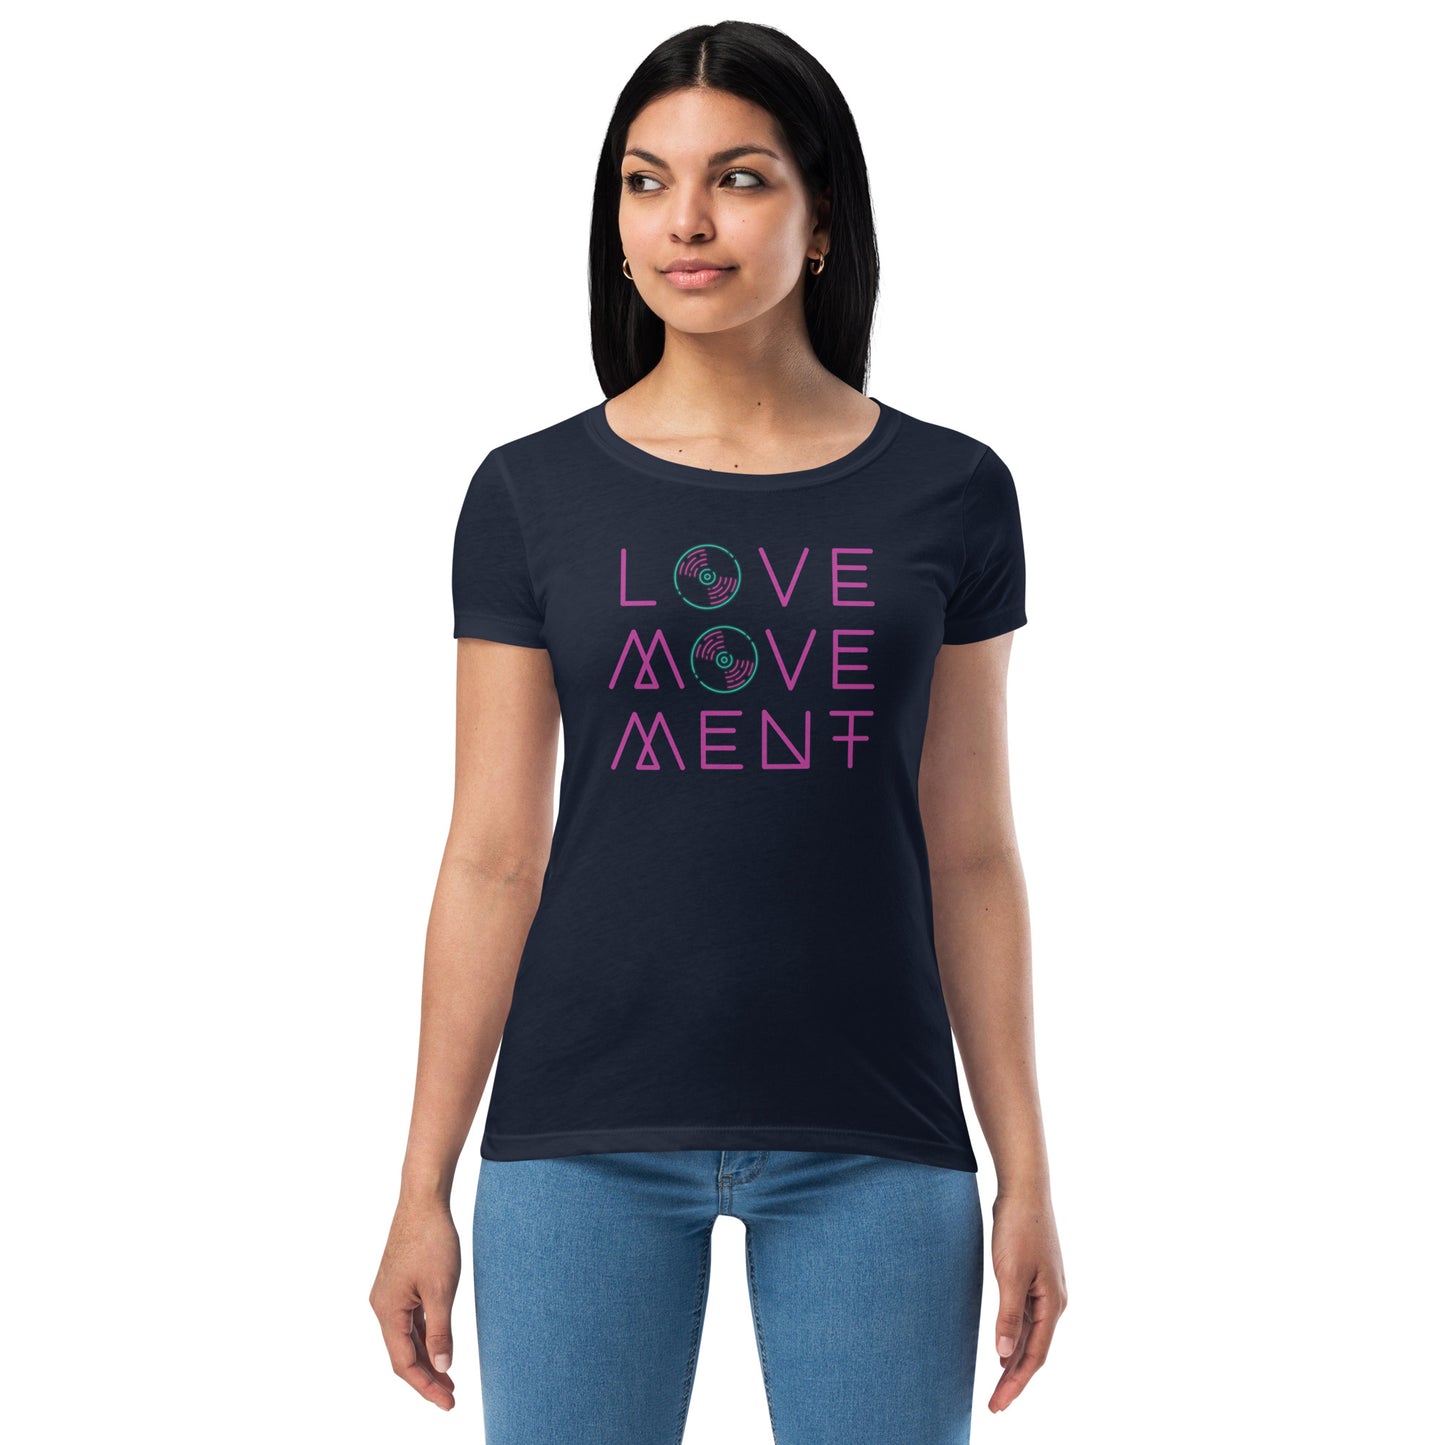 Love Movement Women’s Fitted T-Shirt